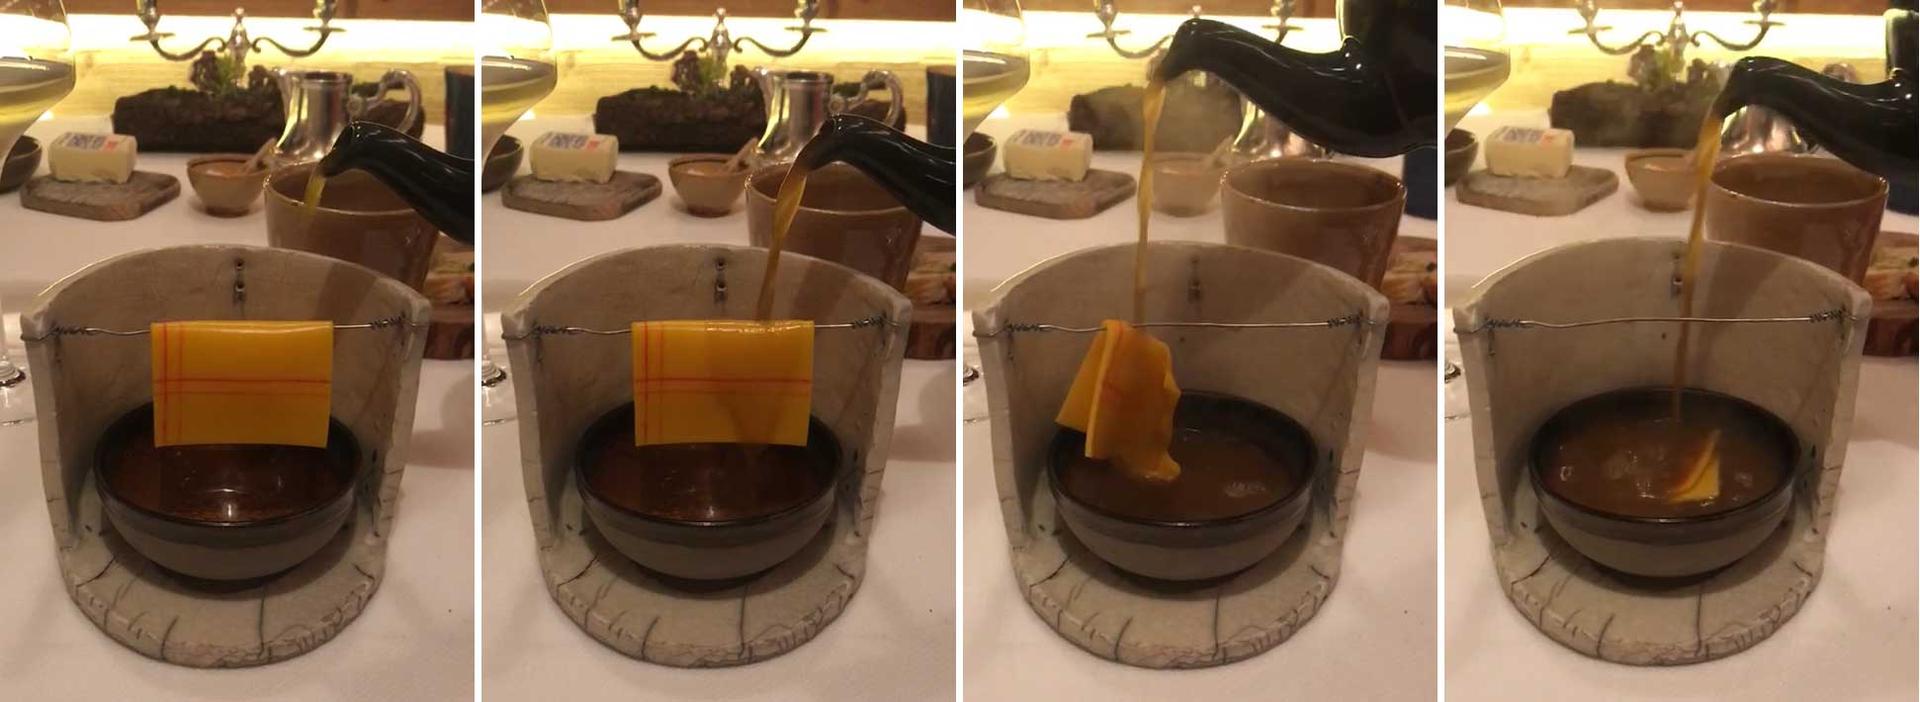 A piece of cheese is pictured in a series of four images as it is melted into a hot broth